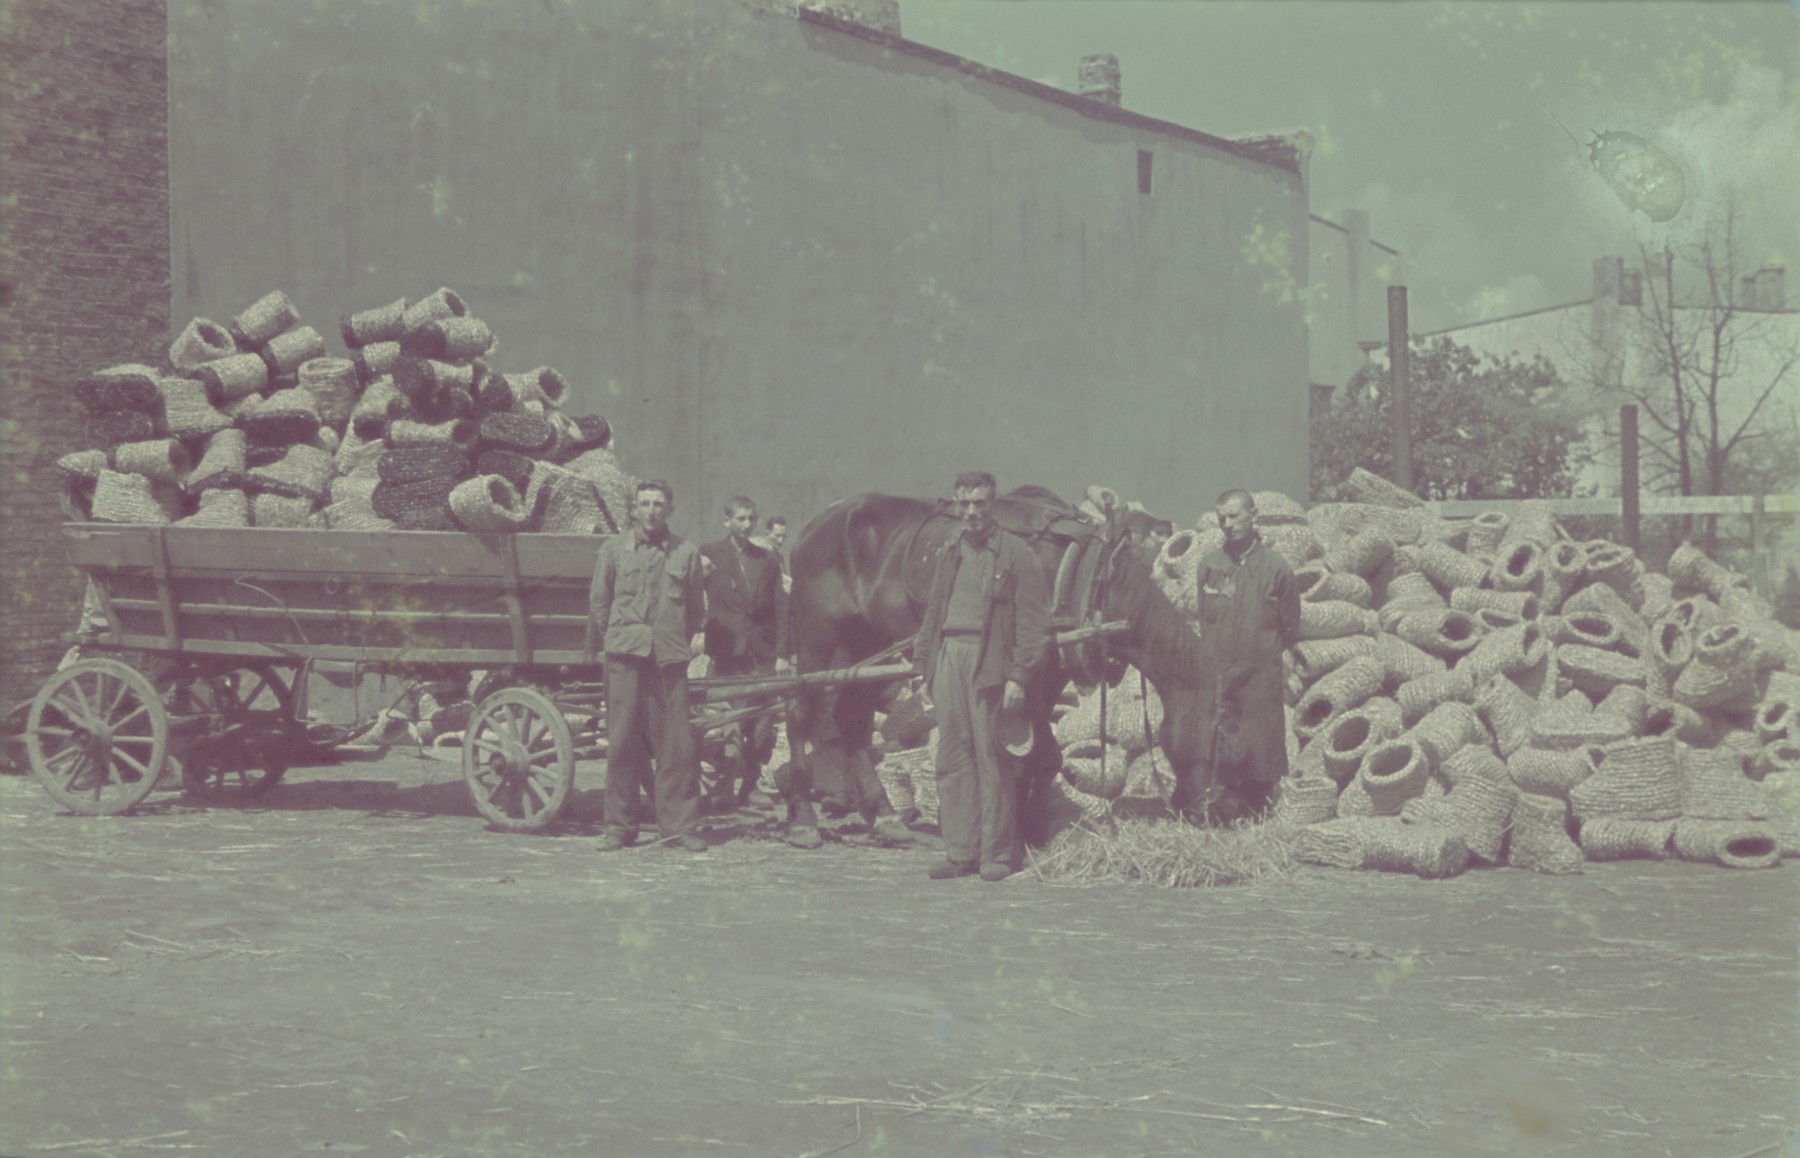 Workers pile coils of straw onto a horse-drawn cart outside the factory for straw shoes in the Lodz ghetto.

Original German caption: "Getto Litzmannstadt, Strohschuhfabrik" (straw shoe factory), #205.